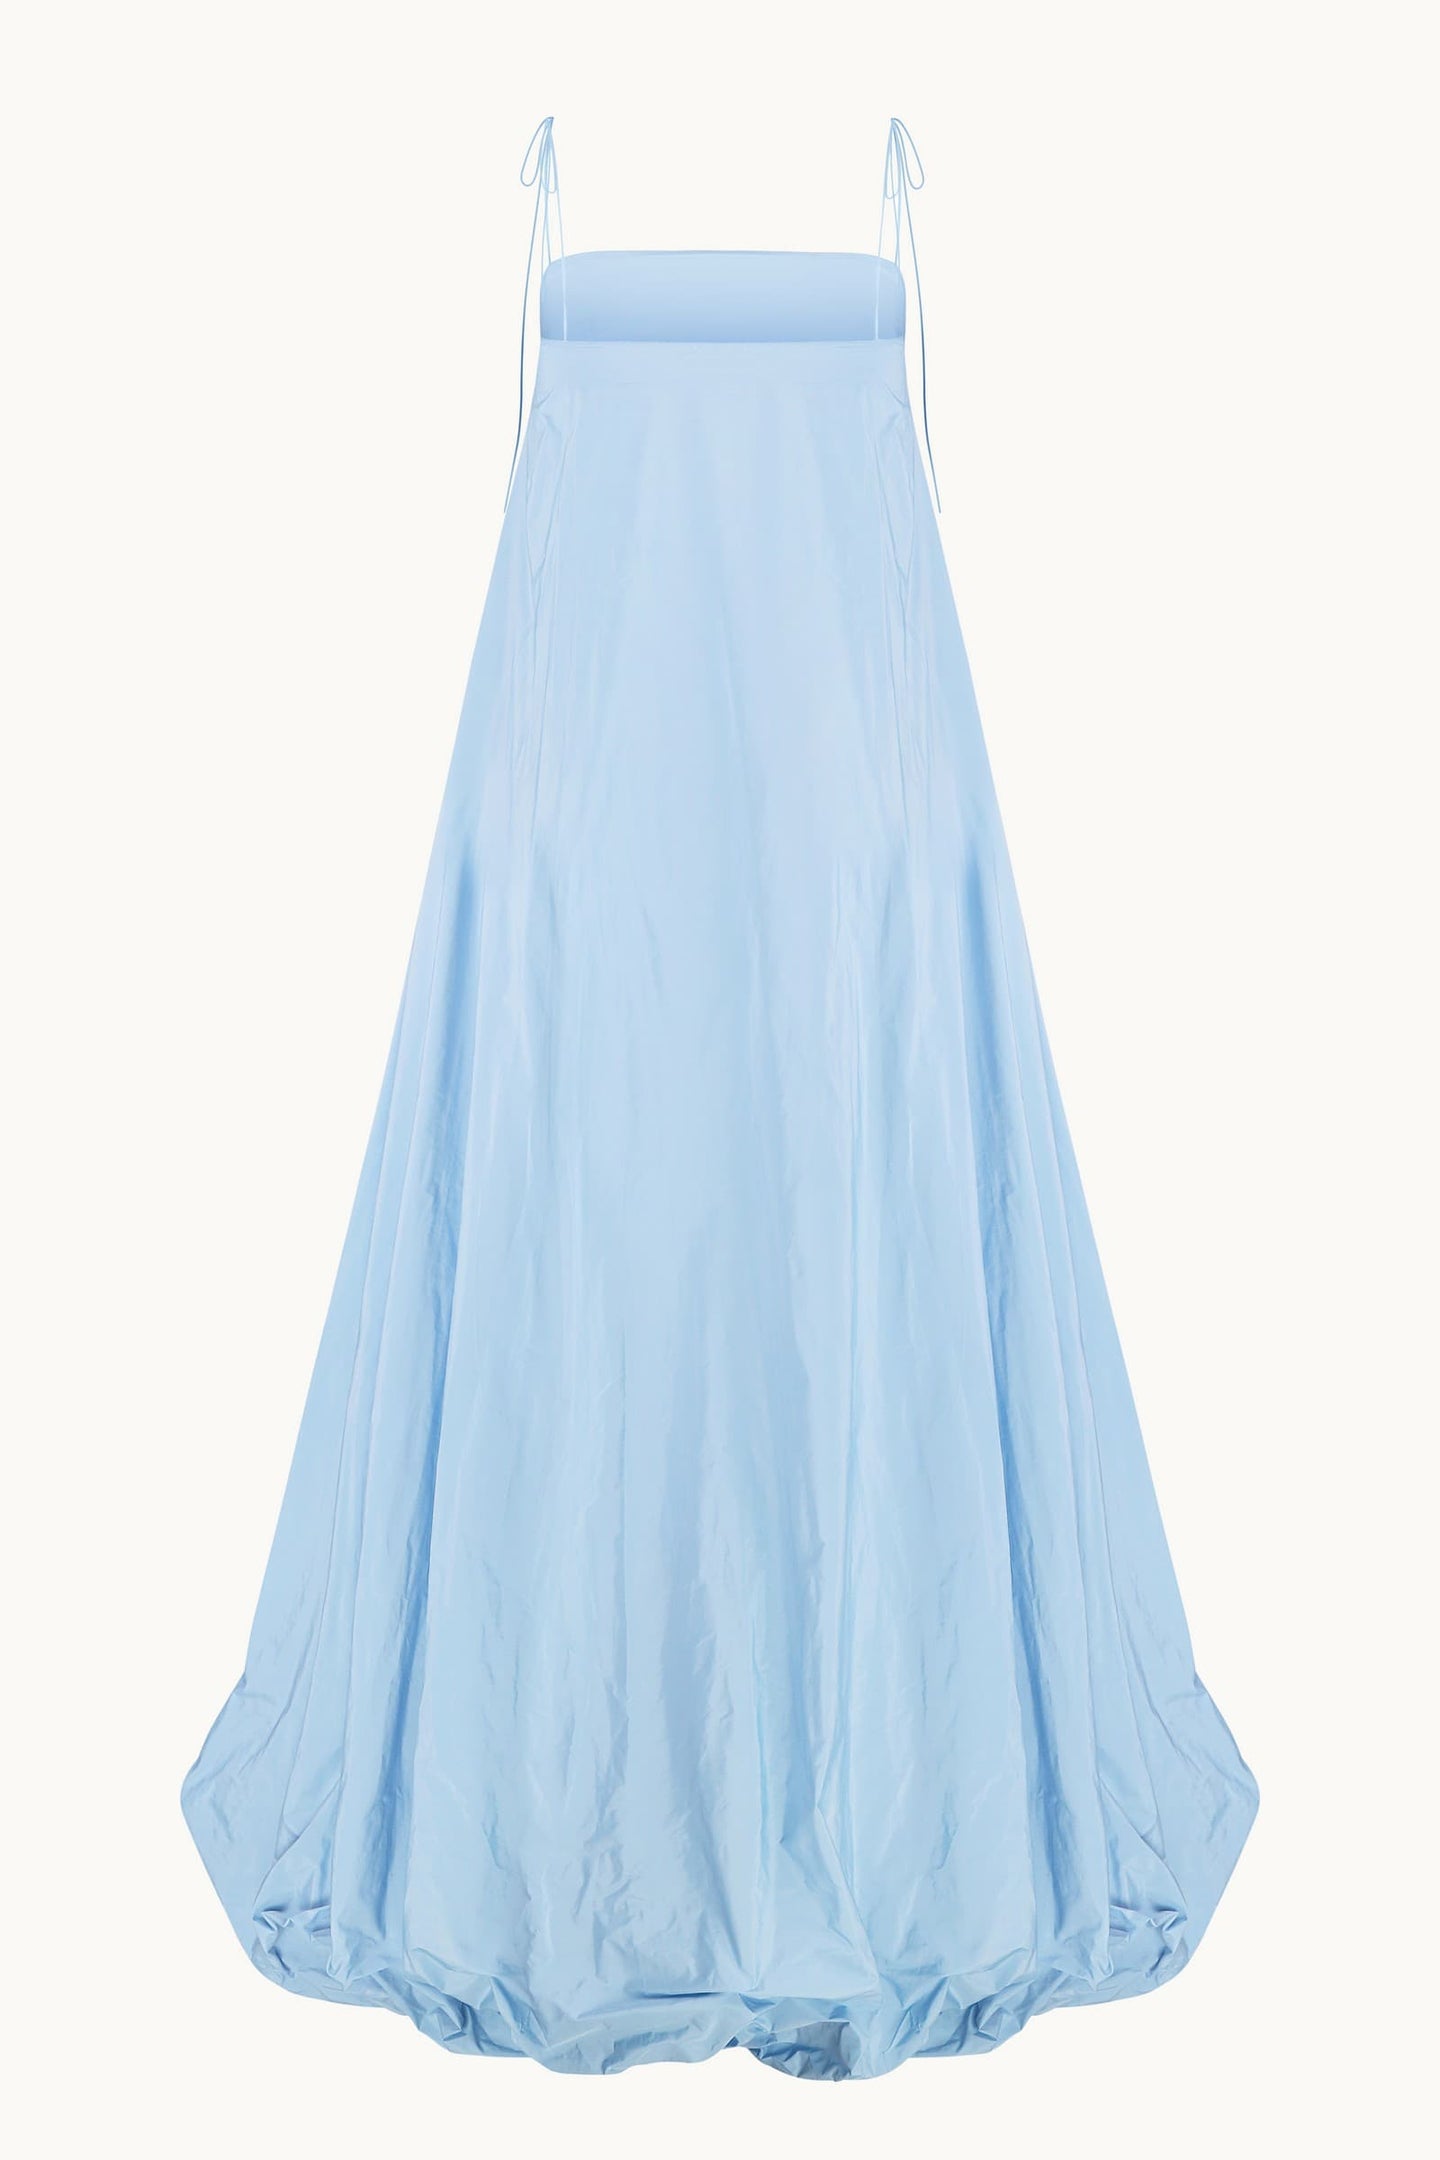 Luis baby blue dress back view